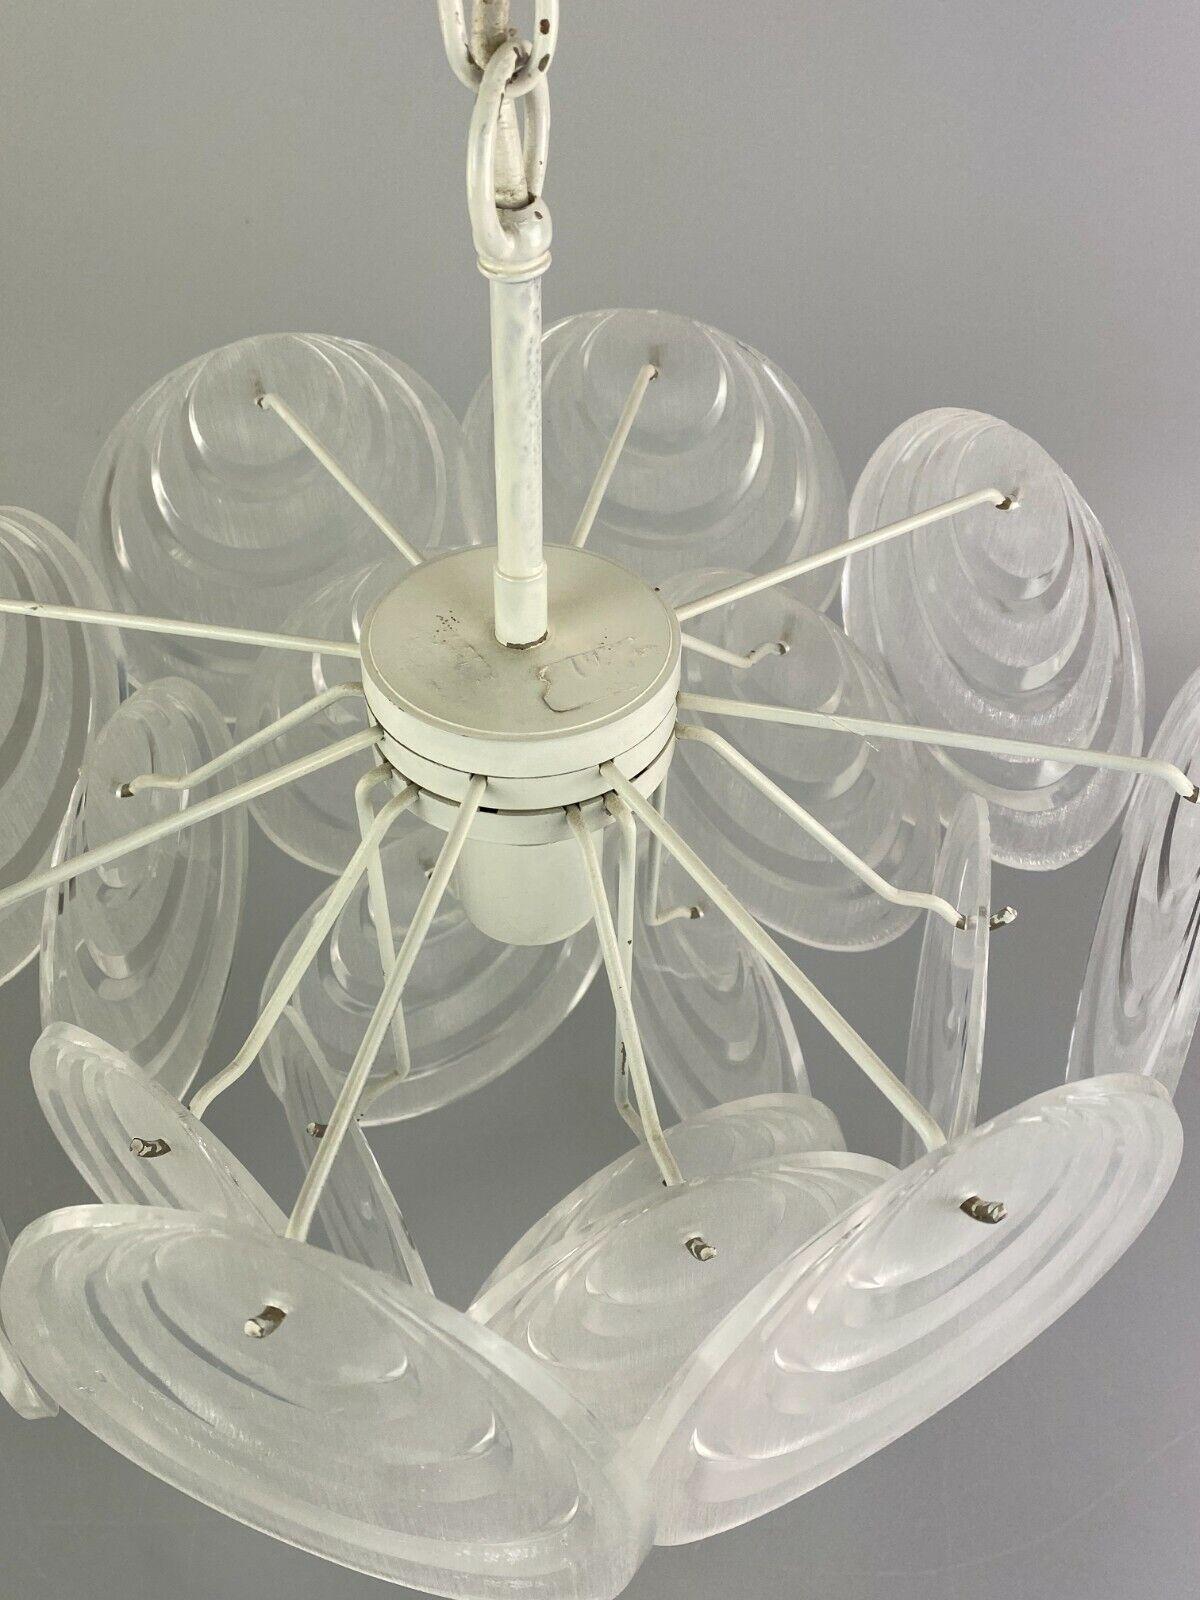 70s Lamp Light Hanging Lamp Ceiling Lamp Space Age Design Plastic For Sale 2